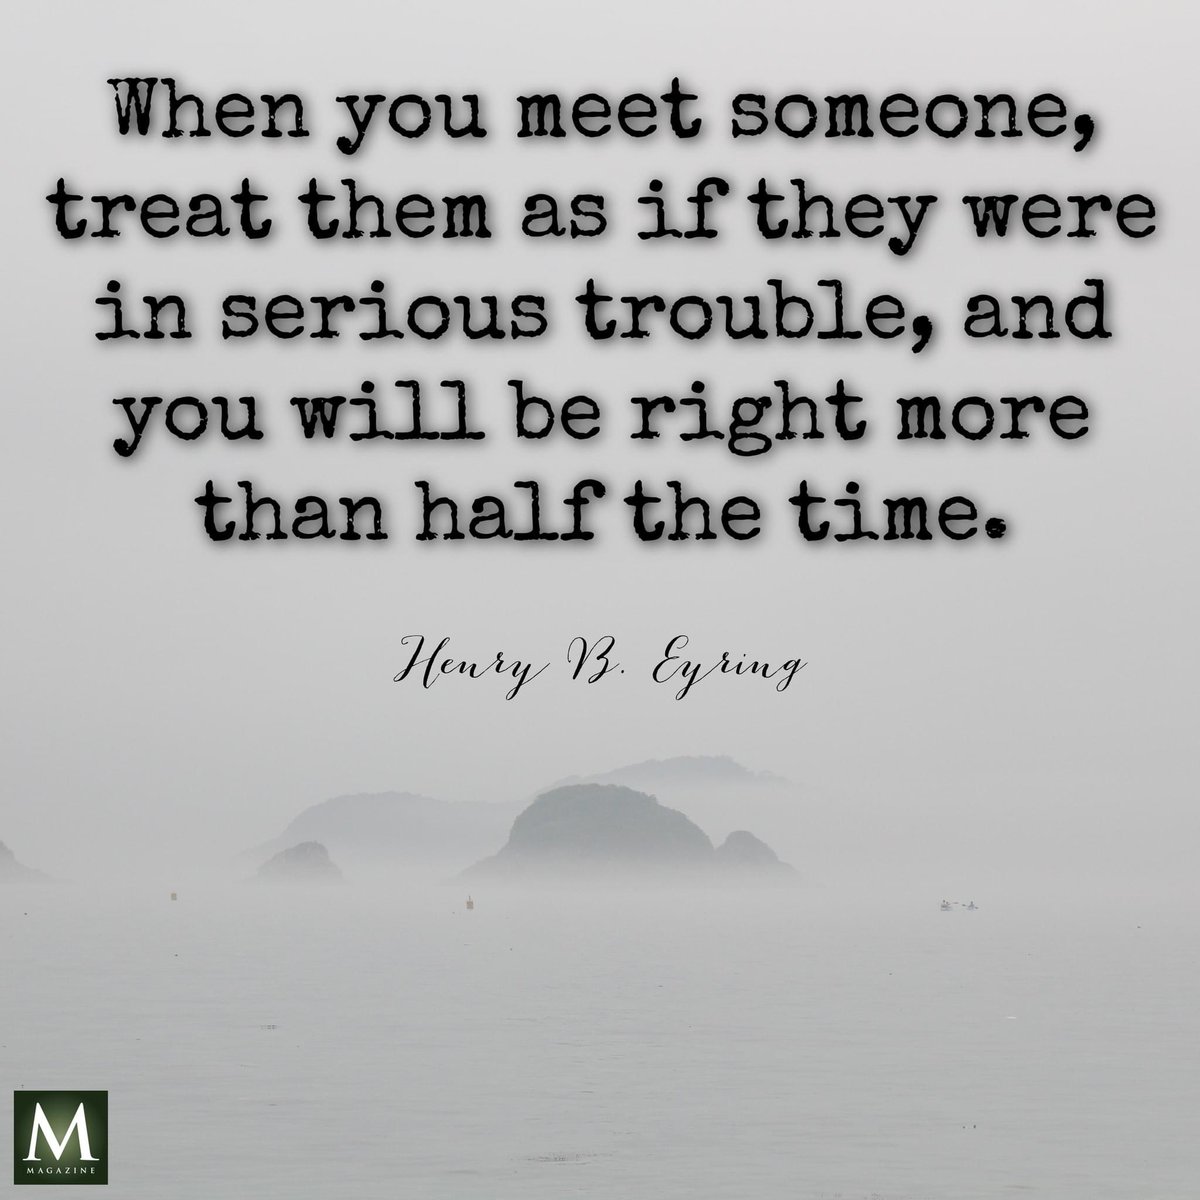 “When you meet someone, treat them as if they were in serious trouble, and you will be right more than half the time.” ~ President Henry B. Eyring

#Kindness #LoveOneAnother #ShareGoodness #BeKind #ChildrenOfGod #GodLovesYou #LightTheWorld #KindnessCounts #TrustGod #LDSChurch